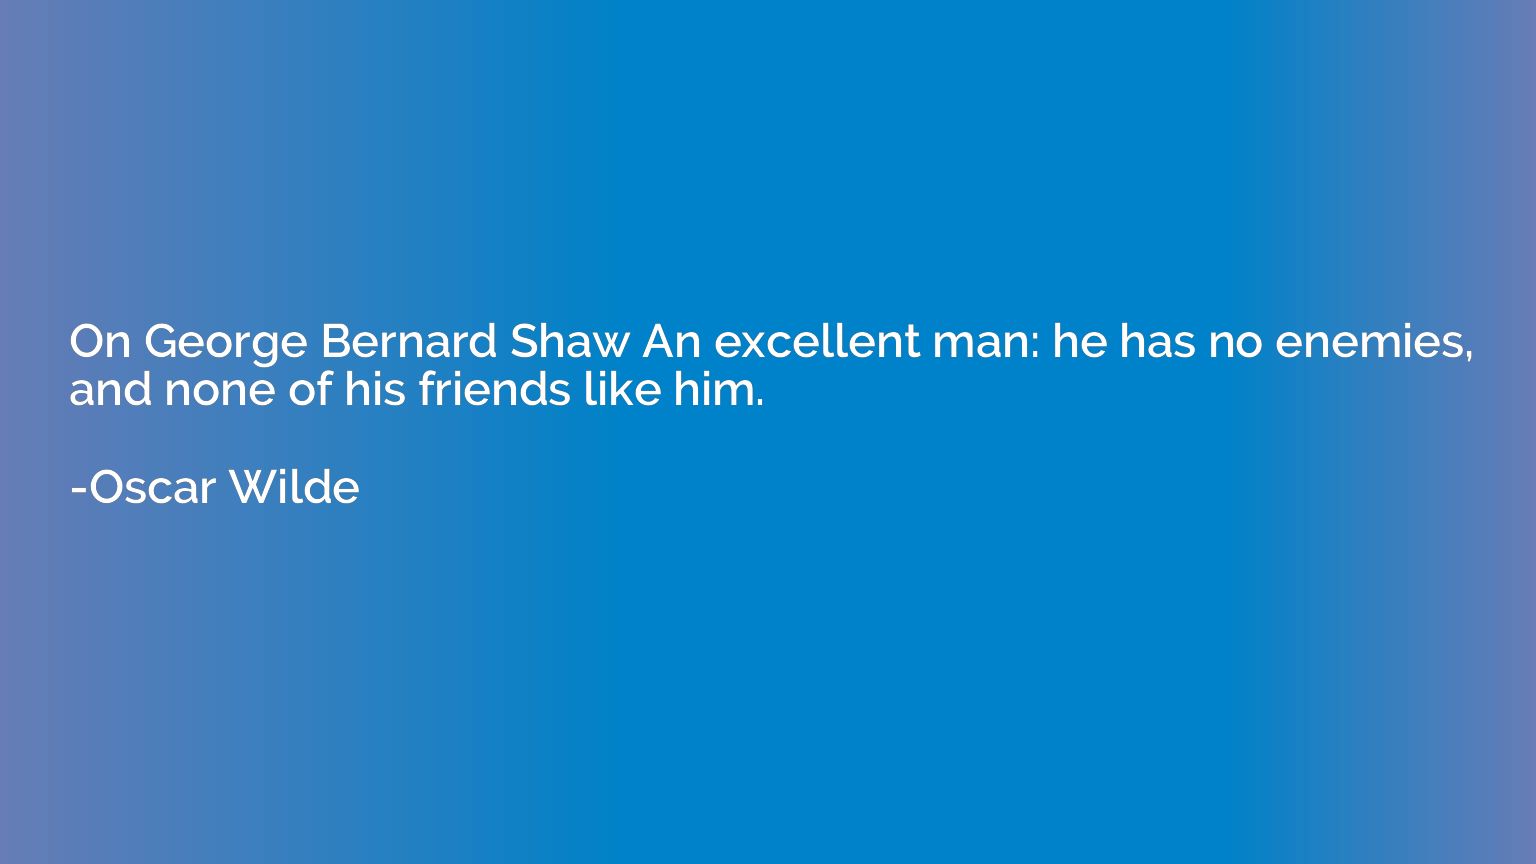 On George Bernard Shaw An excellent man: he has no enemies, 